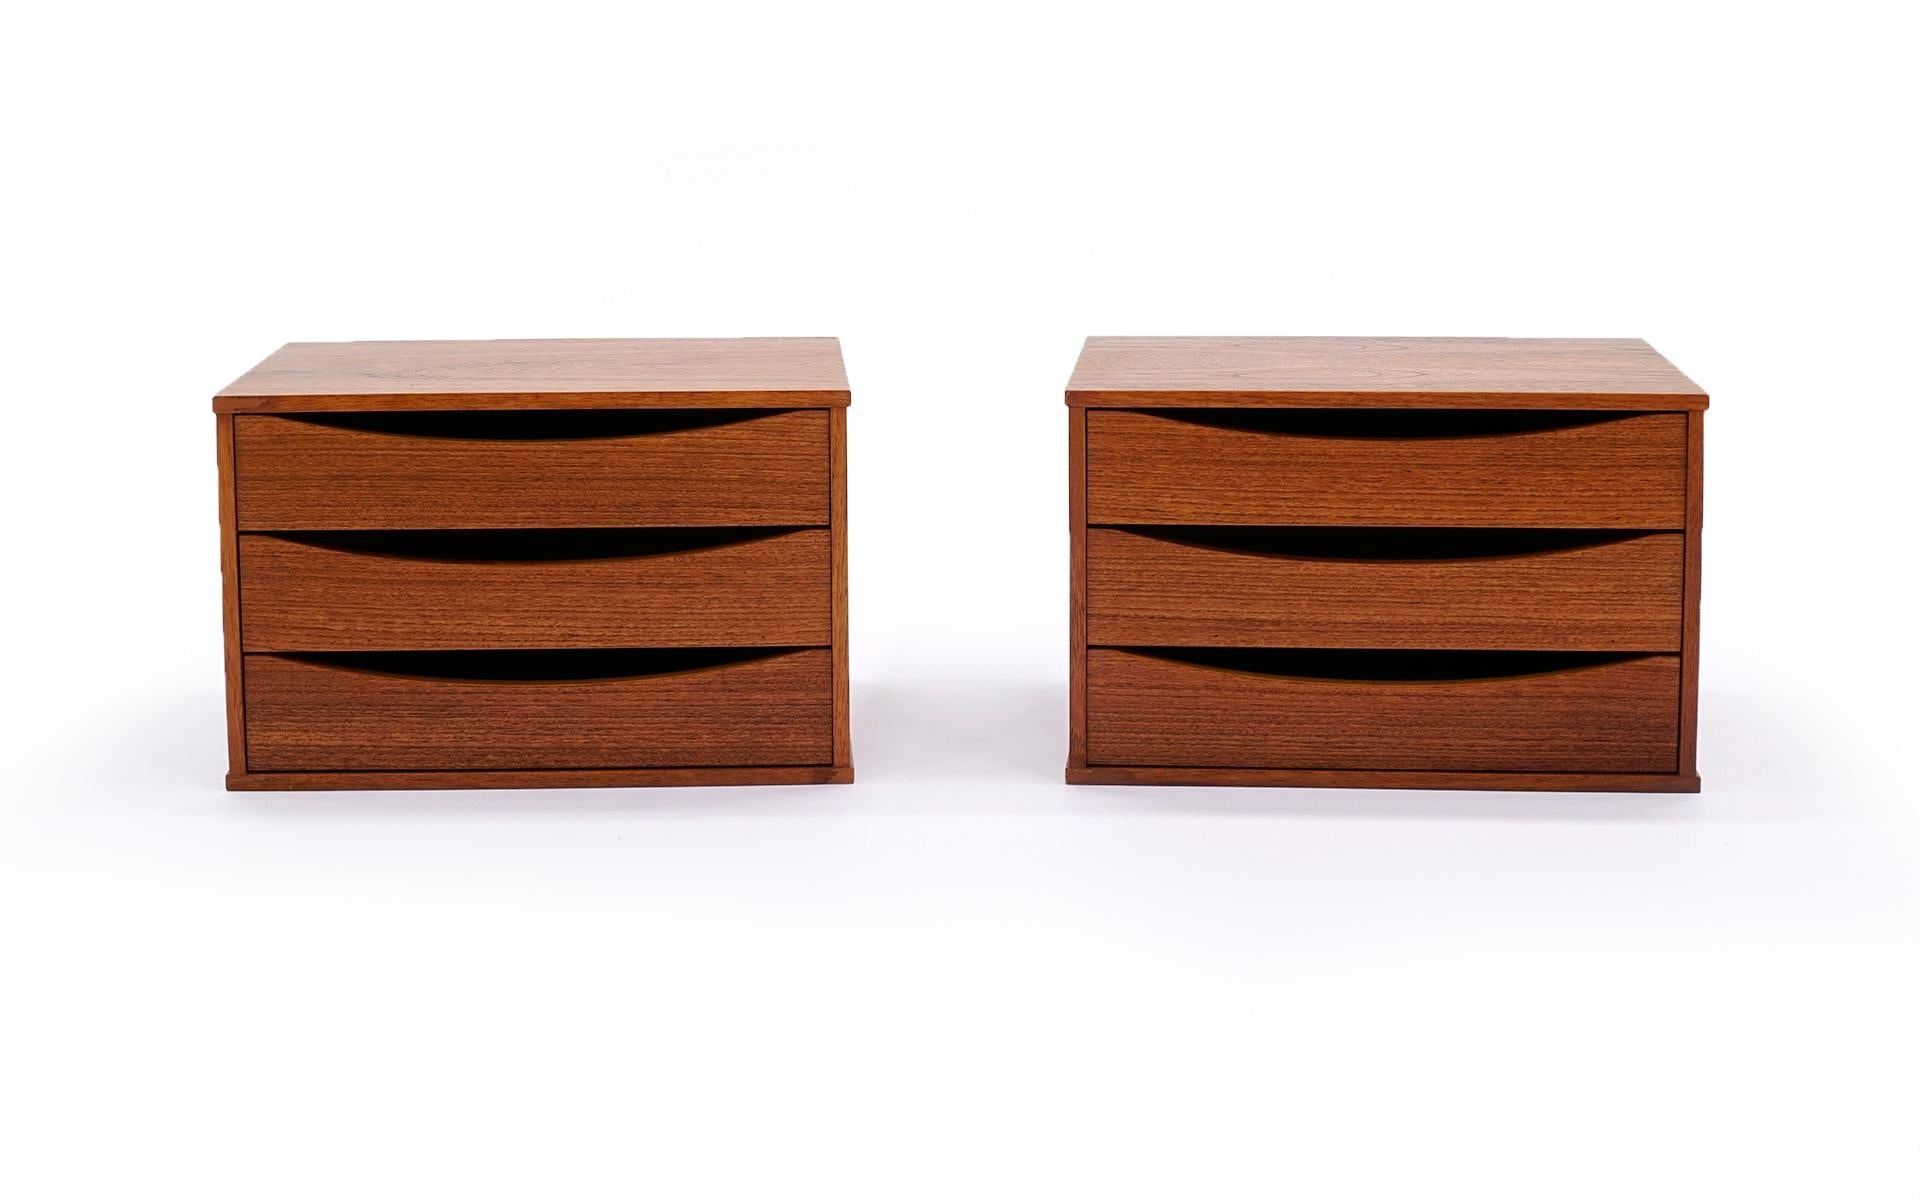 Two jewelry cabinets in teak designed by Arne Vodder and made by Sibast, Denmark. Each has three drawers, some of which are felt lined. The cases are in very good to excellent original condition. These do not need refinishing and are ready to use.